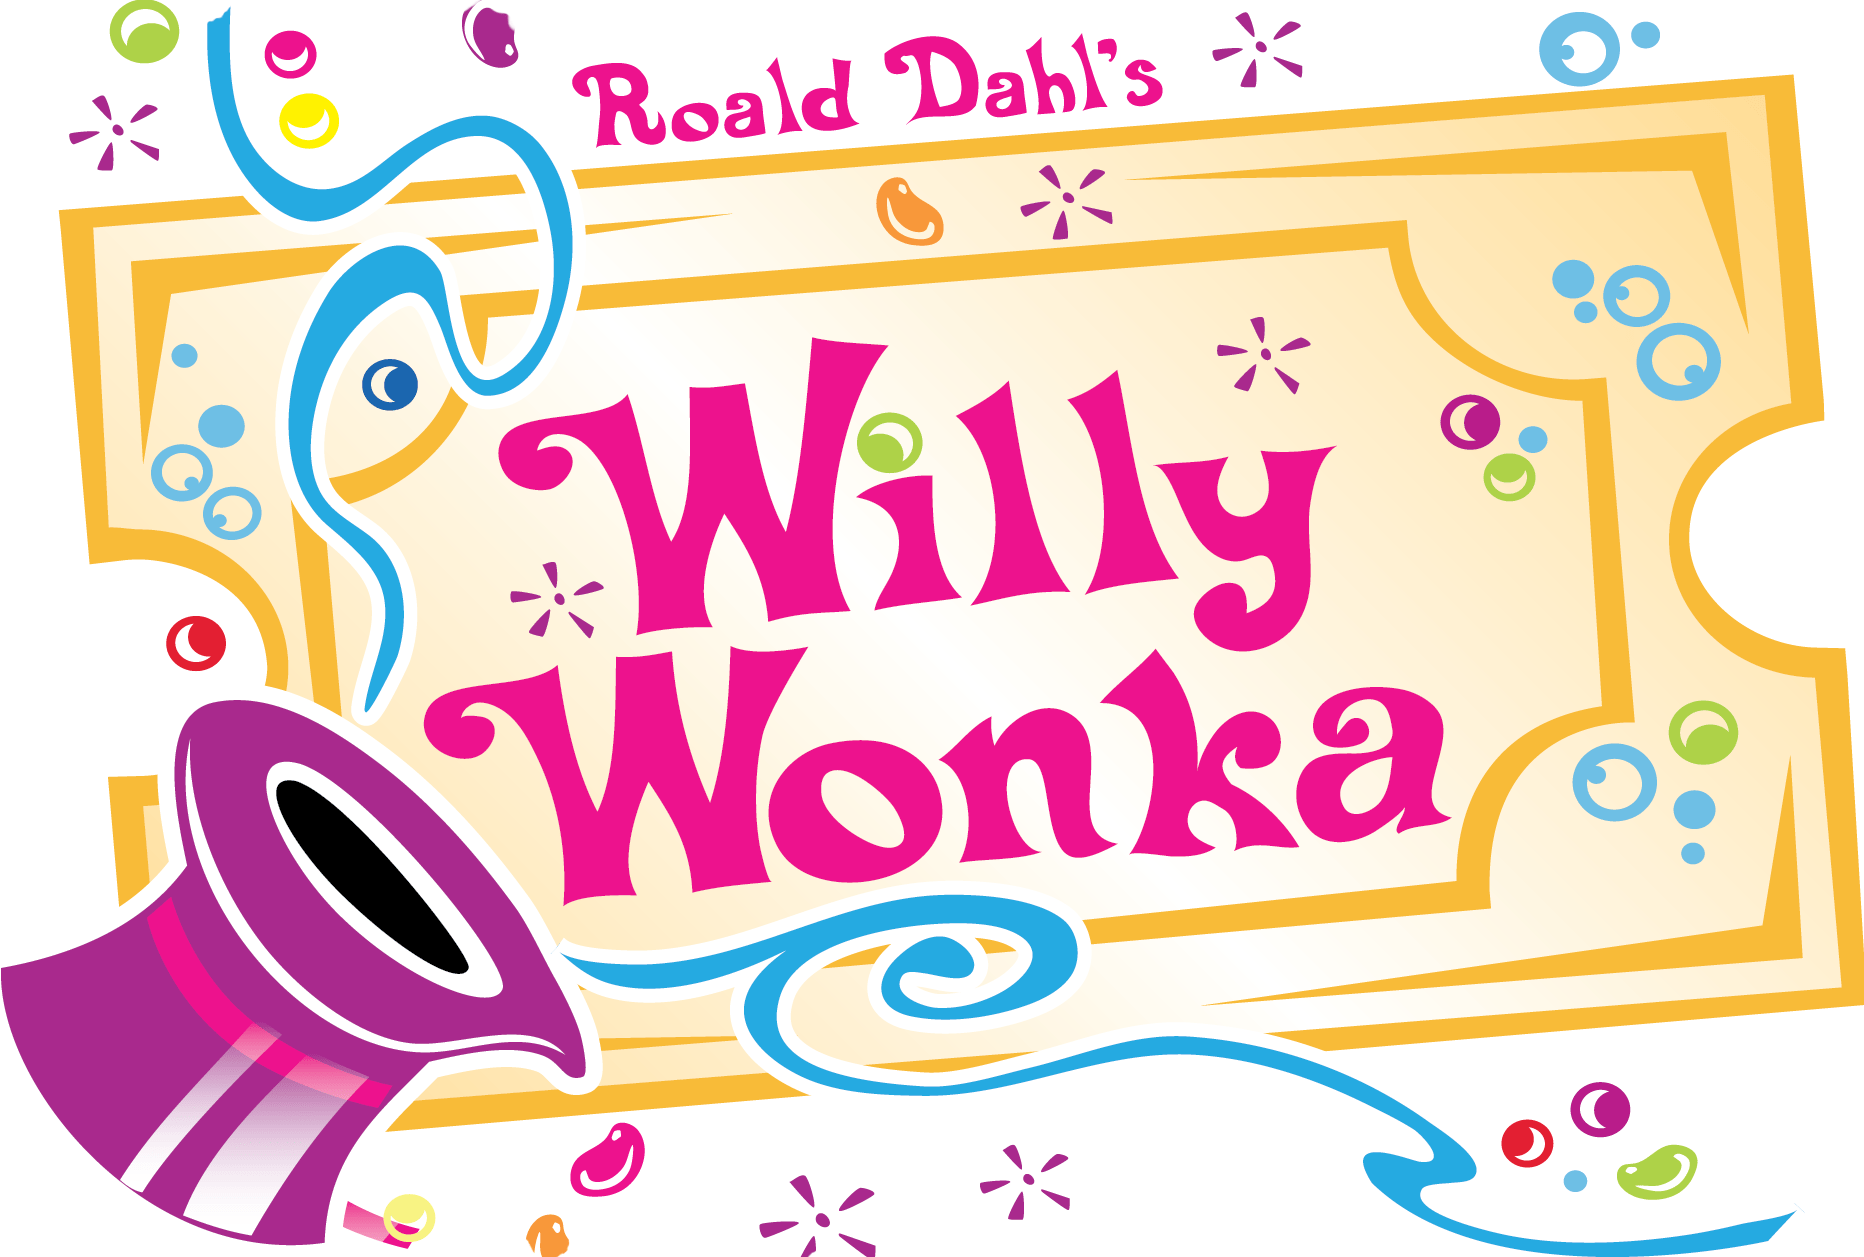 Willy Wonka and the Chocolate Factory Logo